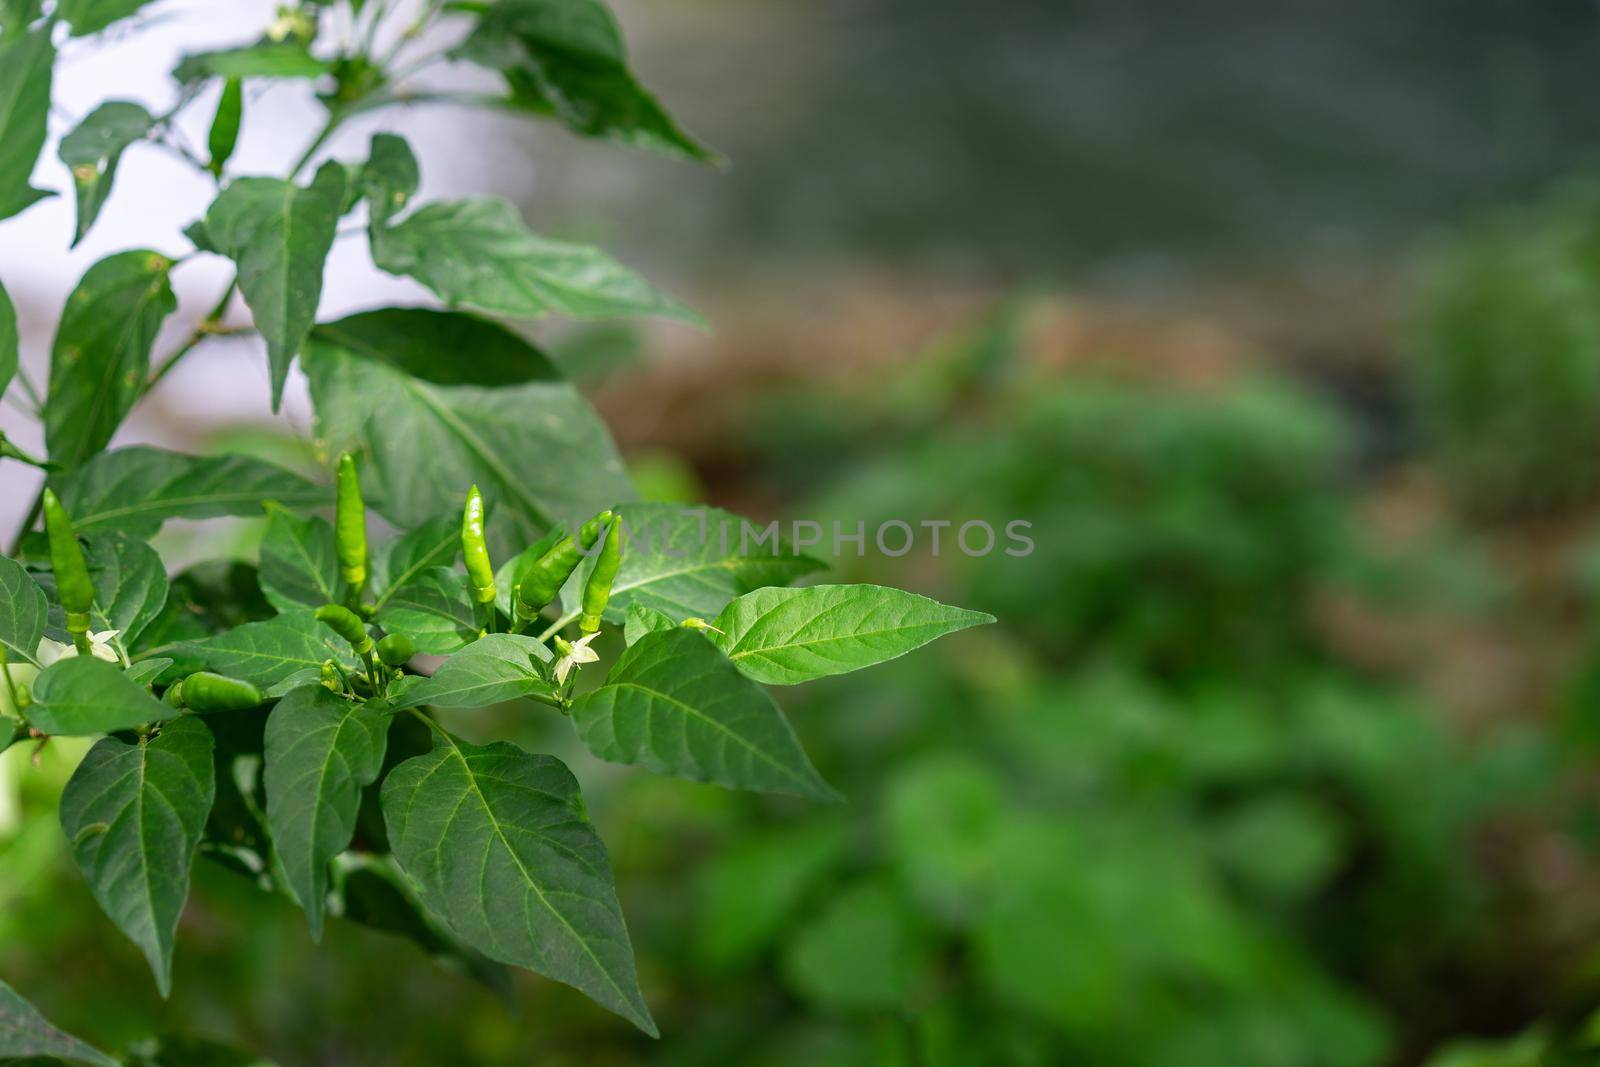 Green chili peppers on the tree in the garden by domonite